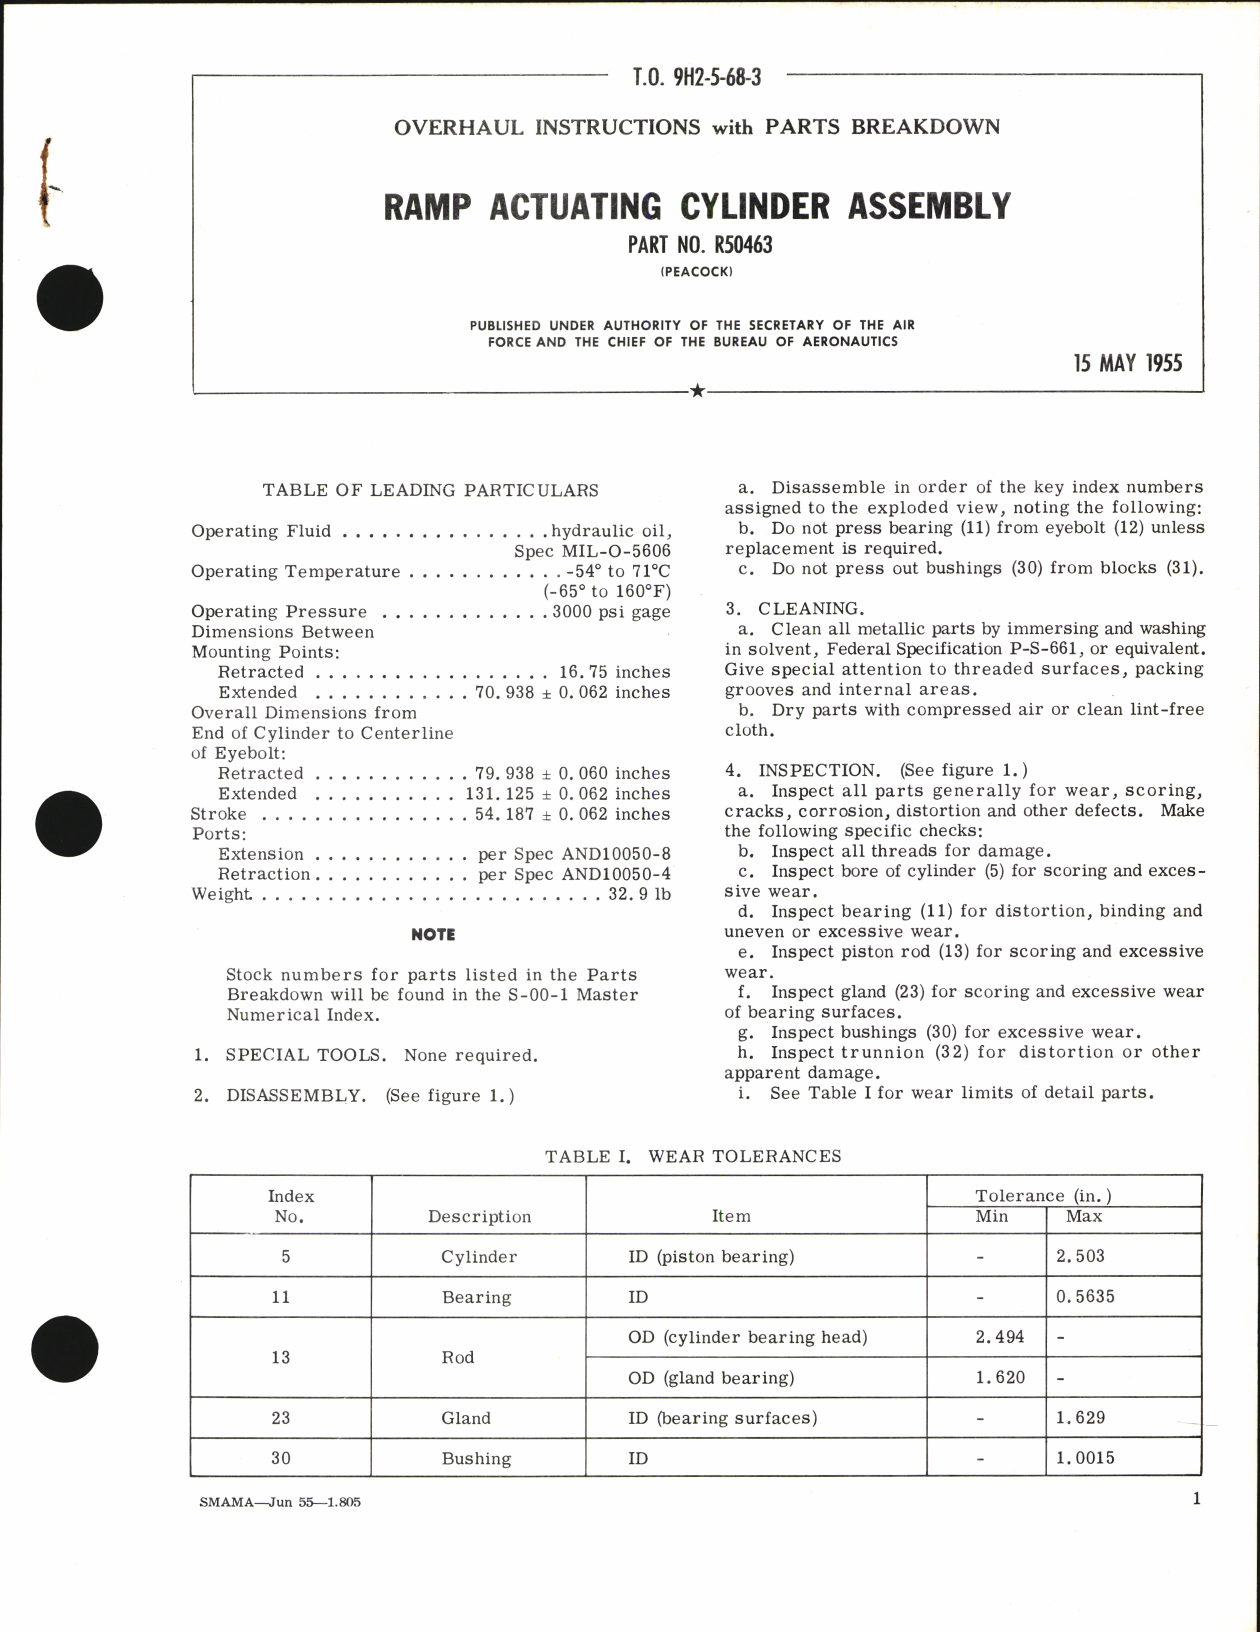 Sample page 1 from AirCorps Library document: Overhaul Instructions with Parts Breakdown for Ramp actuating Cylinder Assembly Part No. R50463